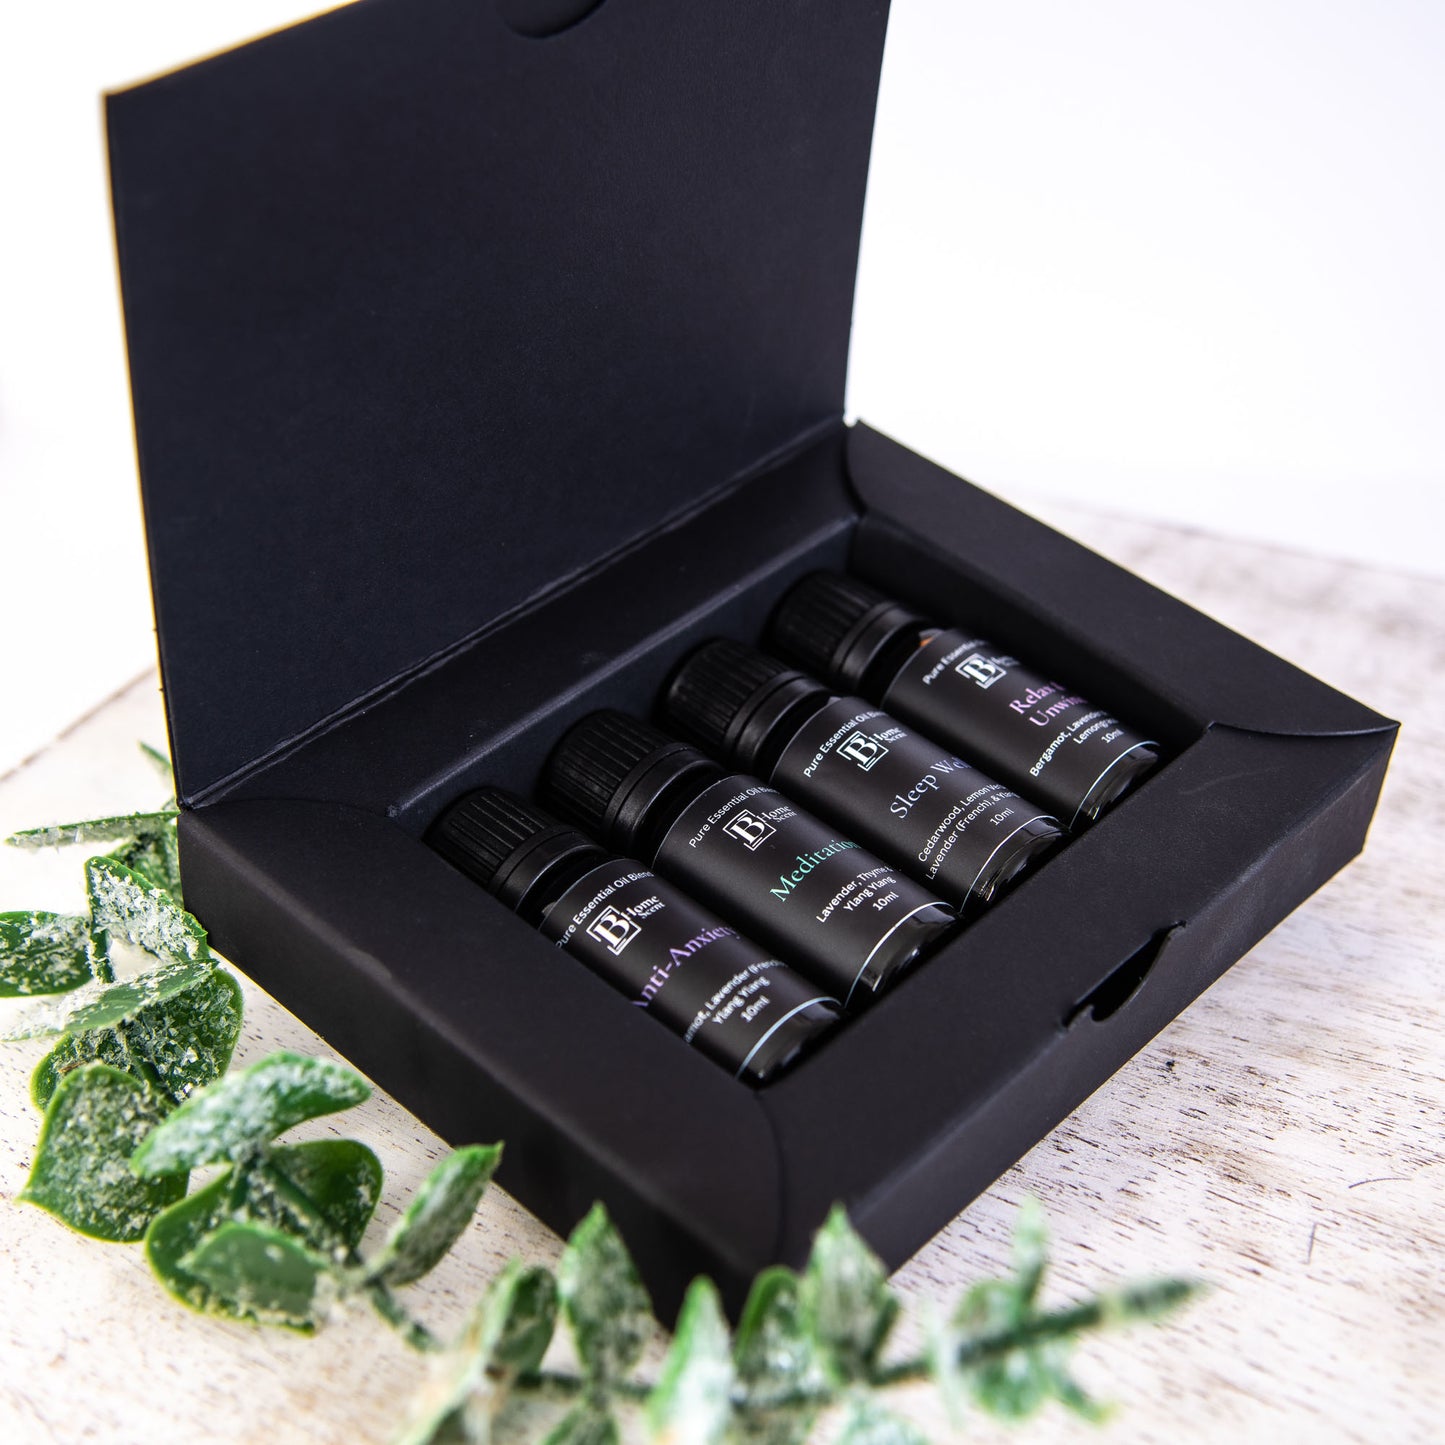 Sleep & Relax Essential Oil Set - Relax & Unwind, Sleep Well, Meditation, Anti - Anxiety - 100% Pure and Natural - Essential Oils for Diffuser, Home, Aromatherapy, Essential Oil Gift Box